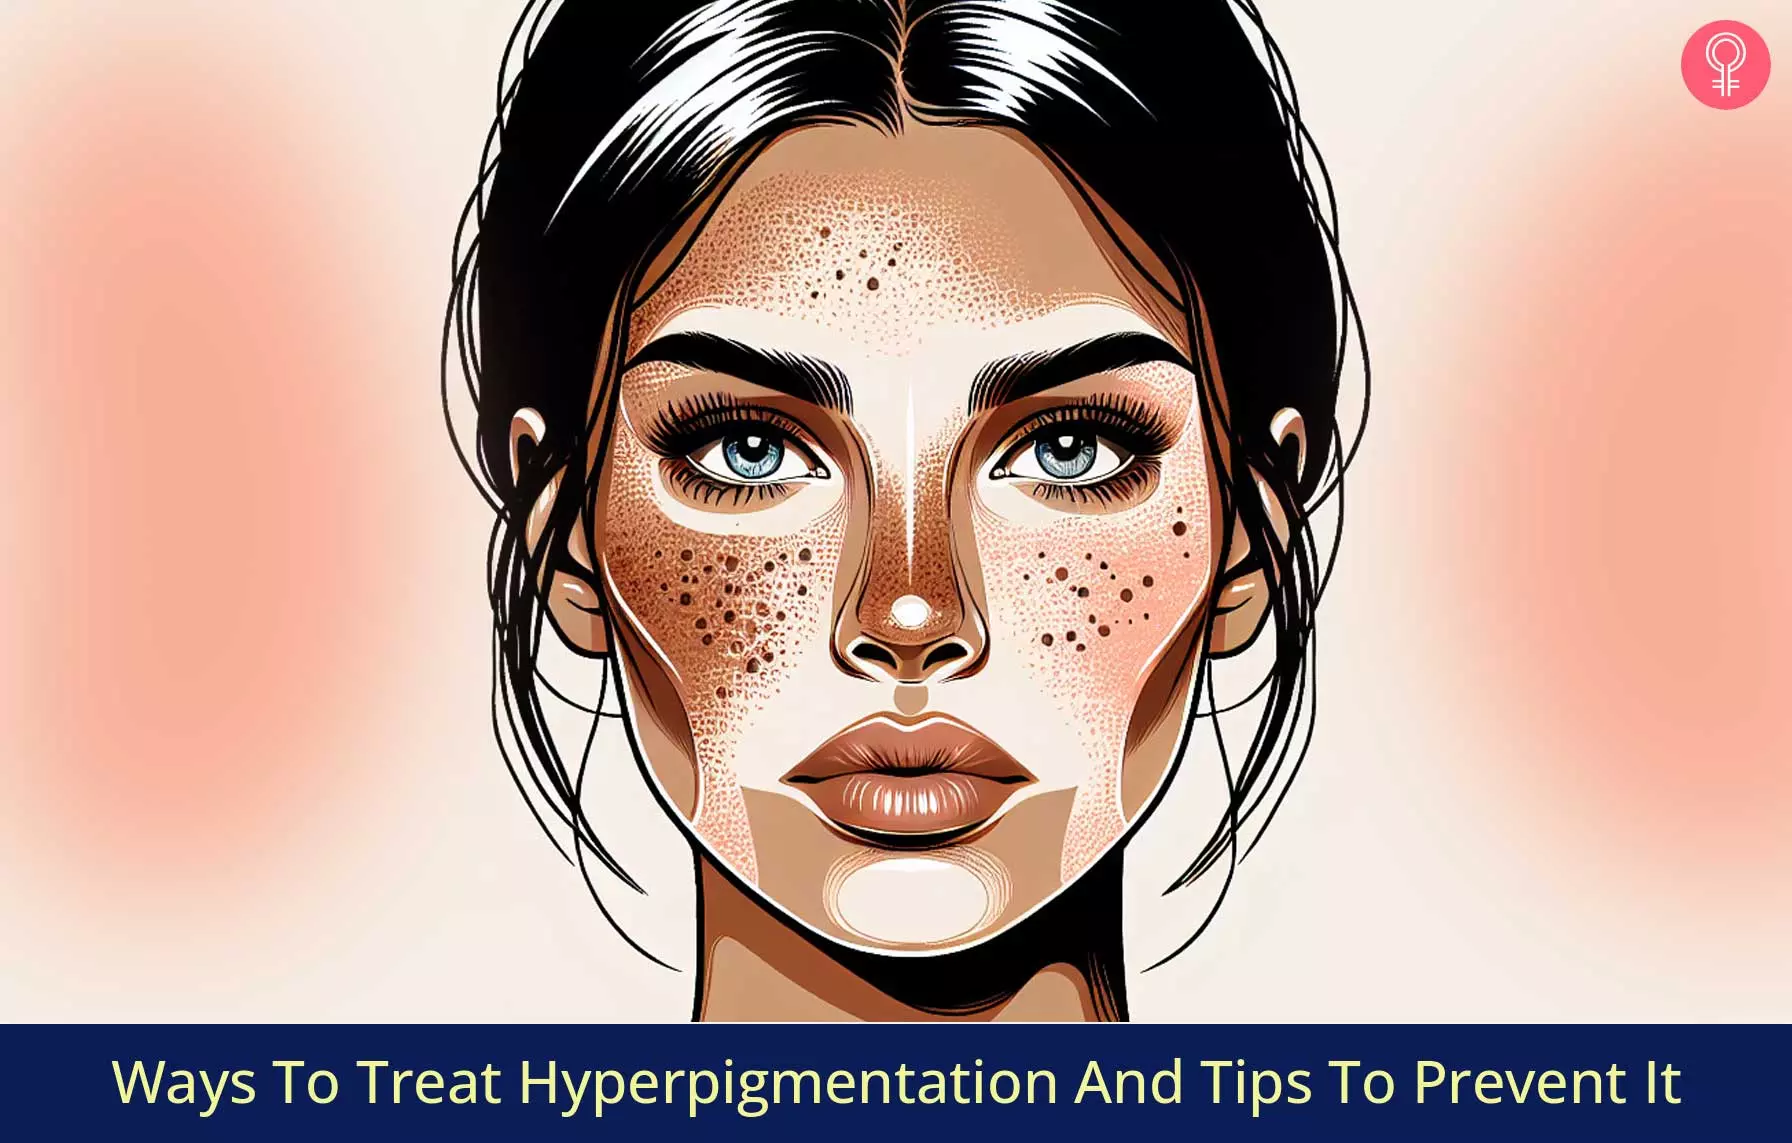 3 Ways To Treat Hyperpigmentation And Tips To Prevent It